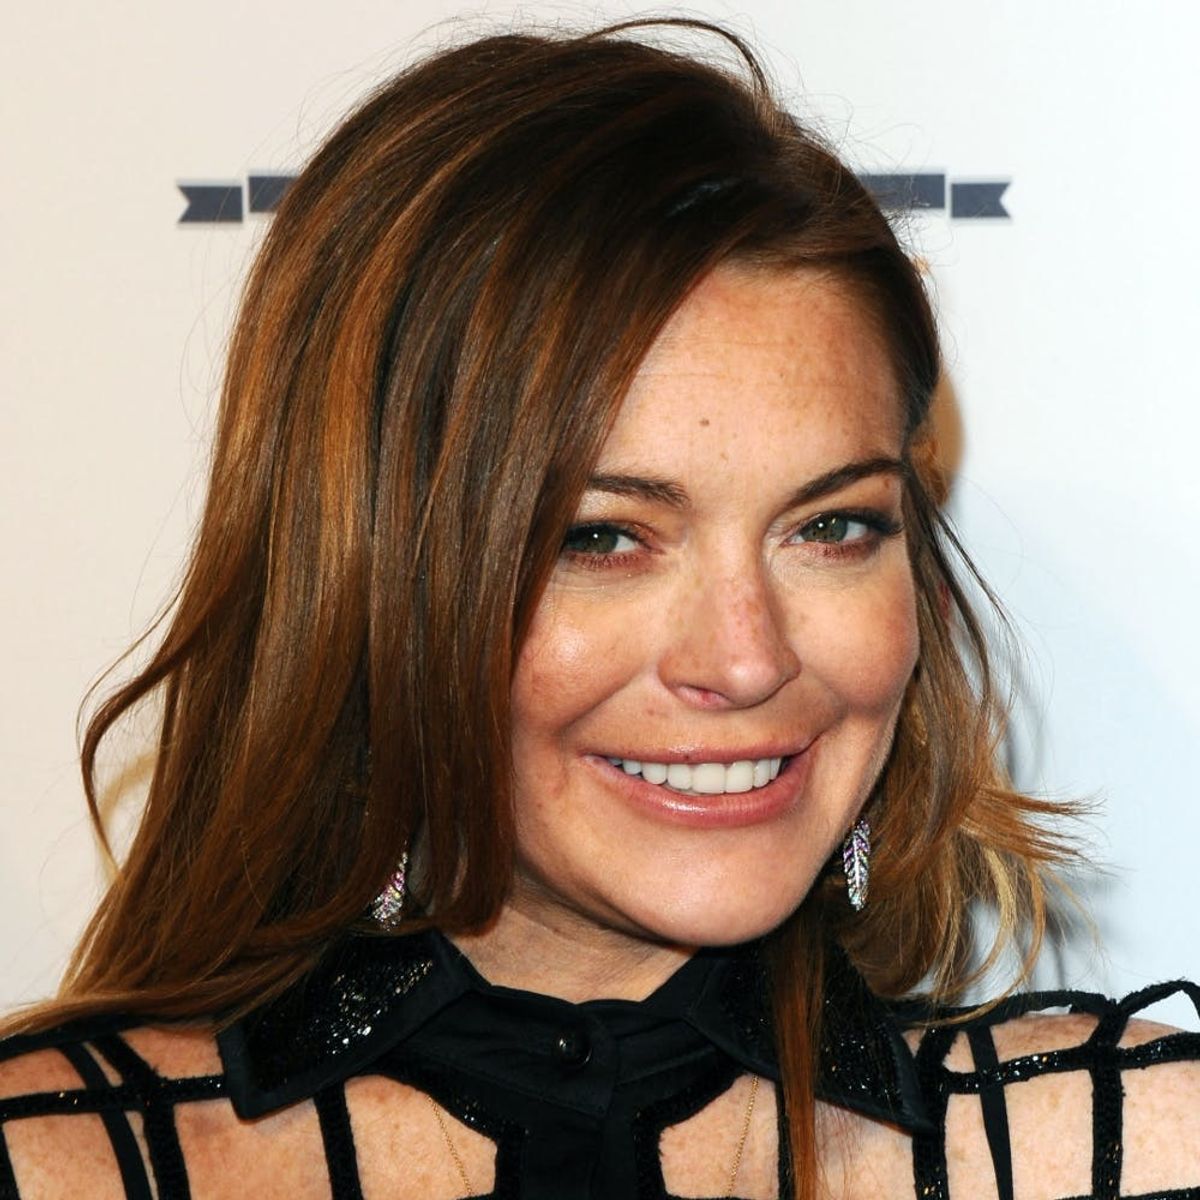 Listen to Lindsay Lohan’s New (Totally Made-Up) Accent That She’s Named “Lilohan”